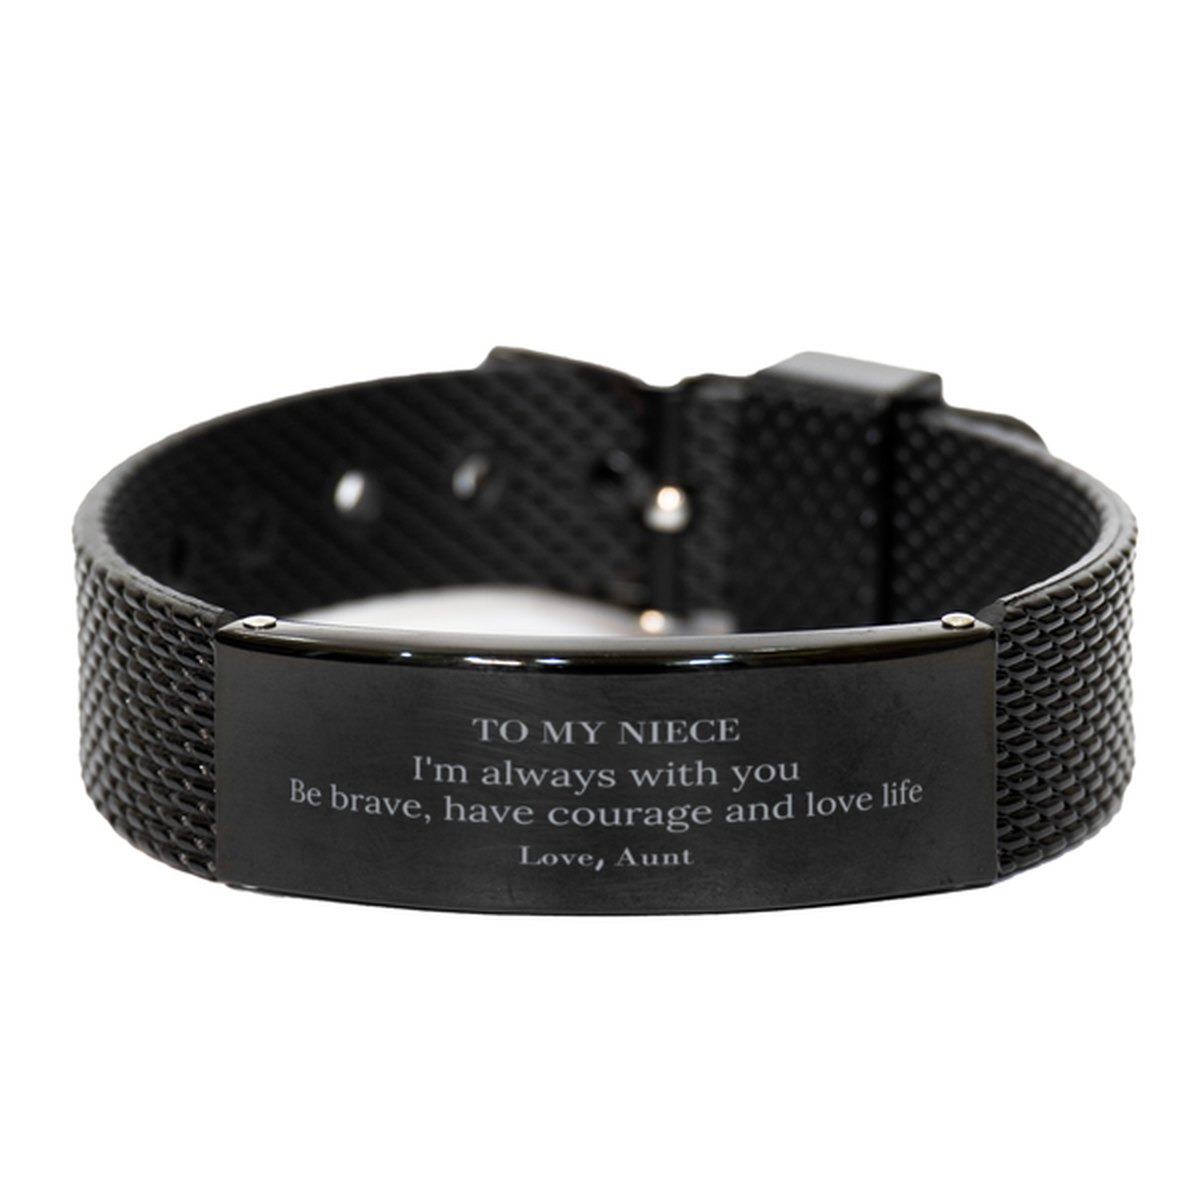 To My Niece Gifts from Aunt, Unique Black Shark Mesh Bracelet Inspirational Christmas Birthday Graduation Gifts for Niece I'm always with you. Be brave, have courage and love life. Love, Aunt